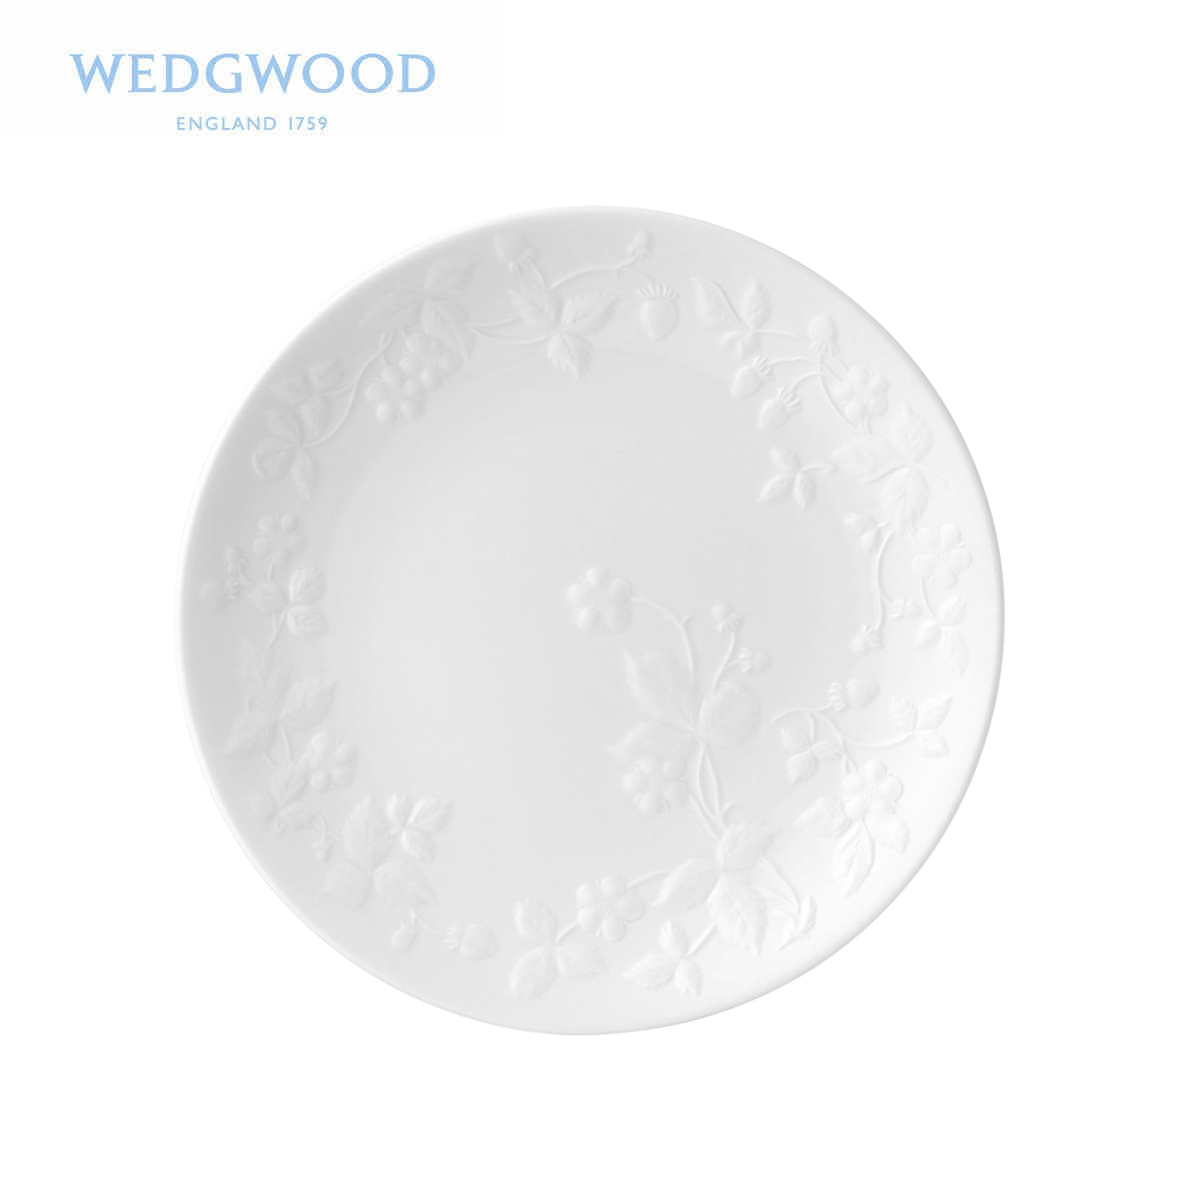 Wedgwood Wild Strawberry White White Strawberry embossment pattern plate 21 cm ipads porcelain plates